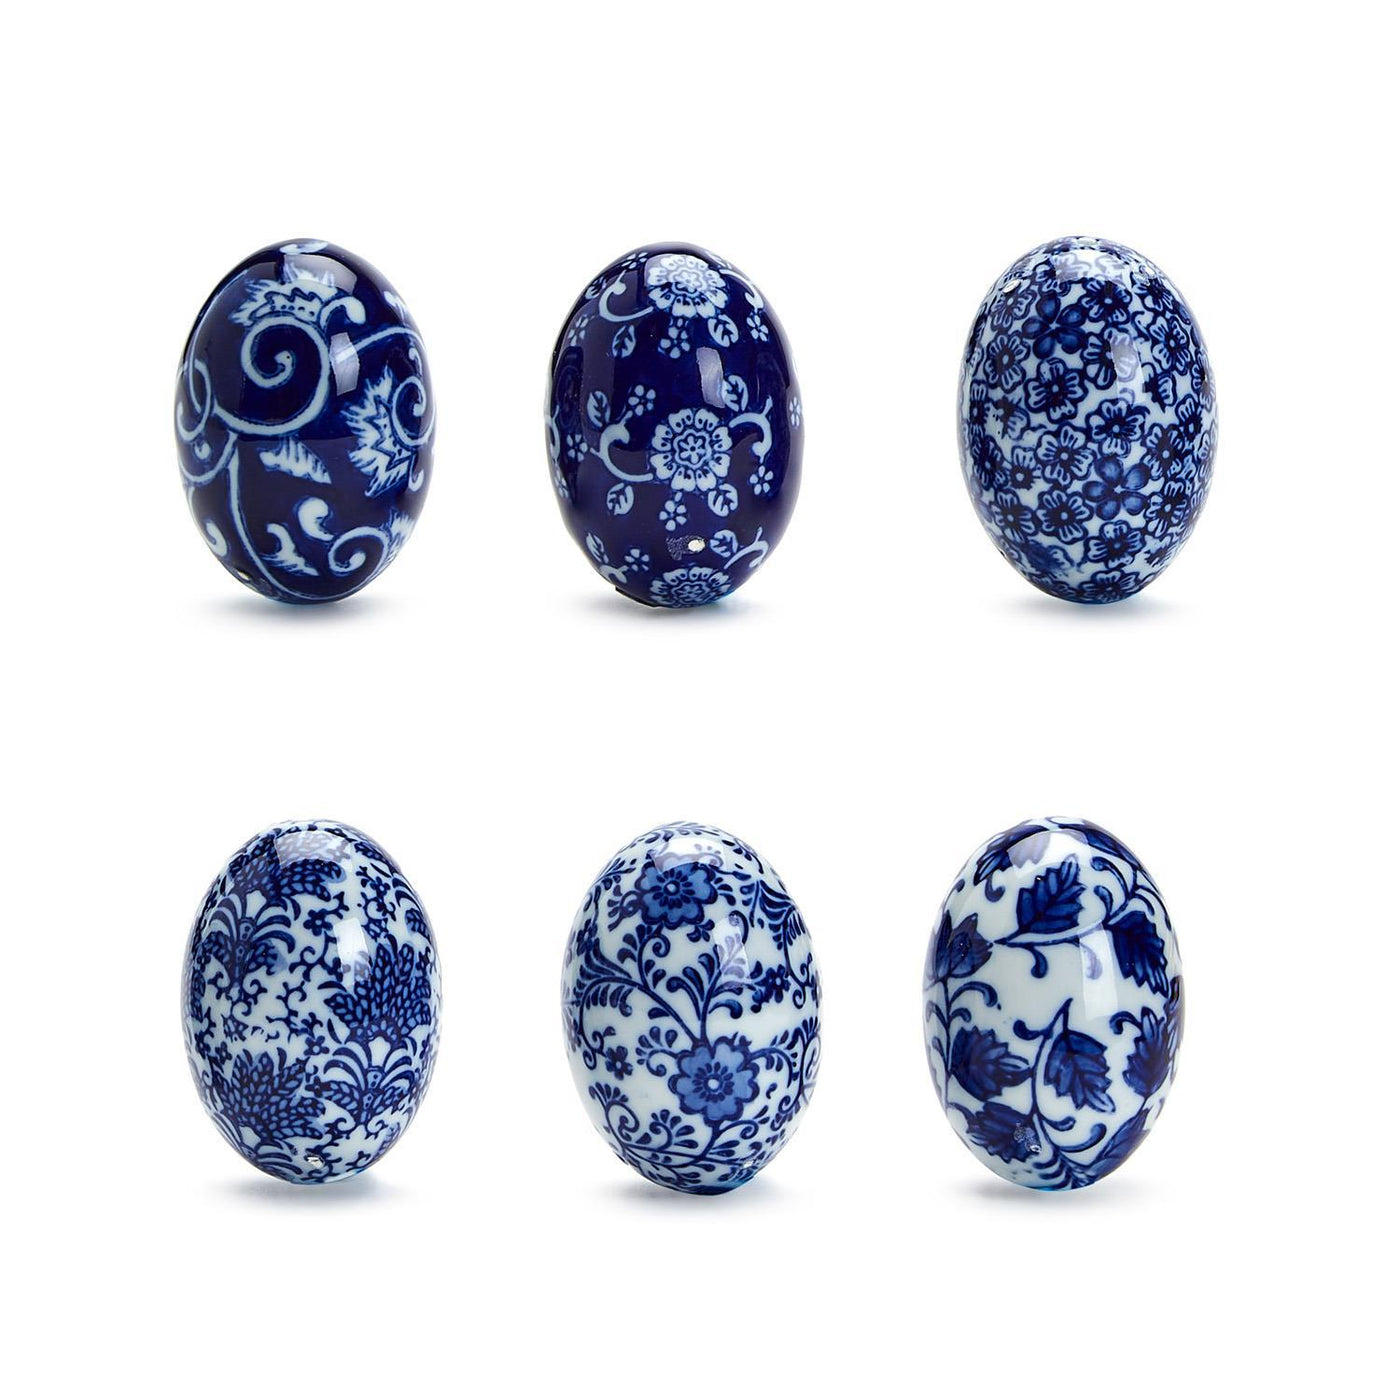 Blue and White Set of 6 Hand-Painted Porcelain Eggs